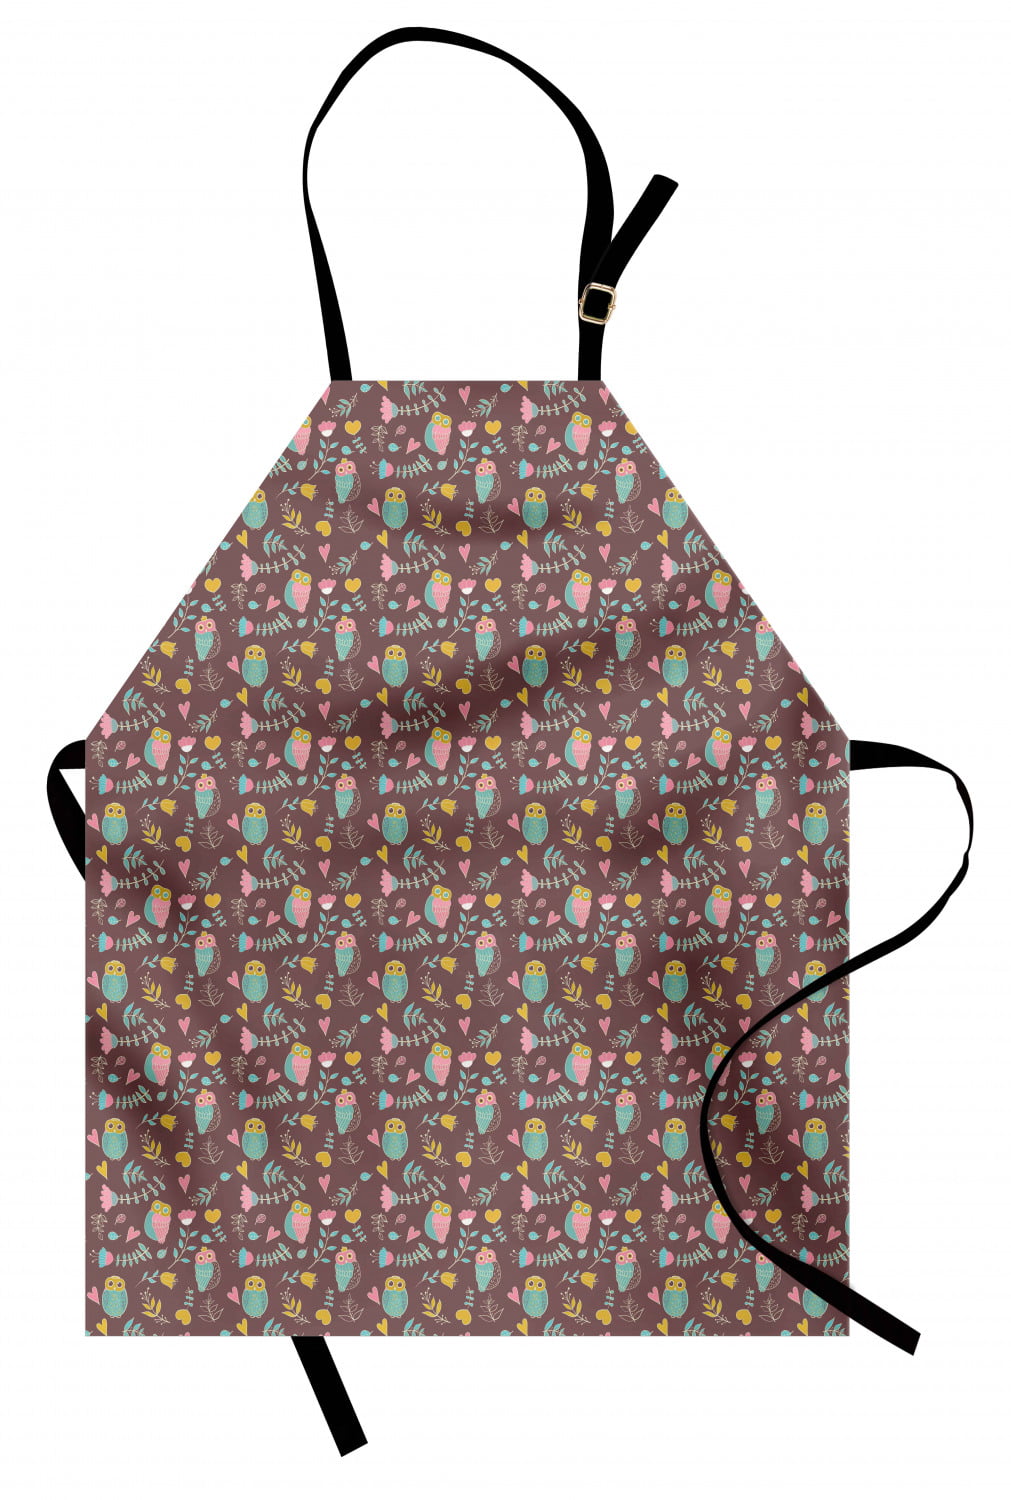 Details about   Standard Size Apron Bib with Adjustable Strap for Gardening Cooking Ambesonne